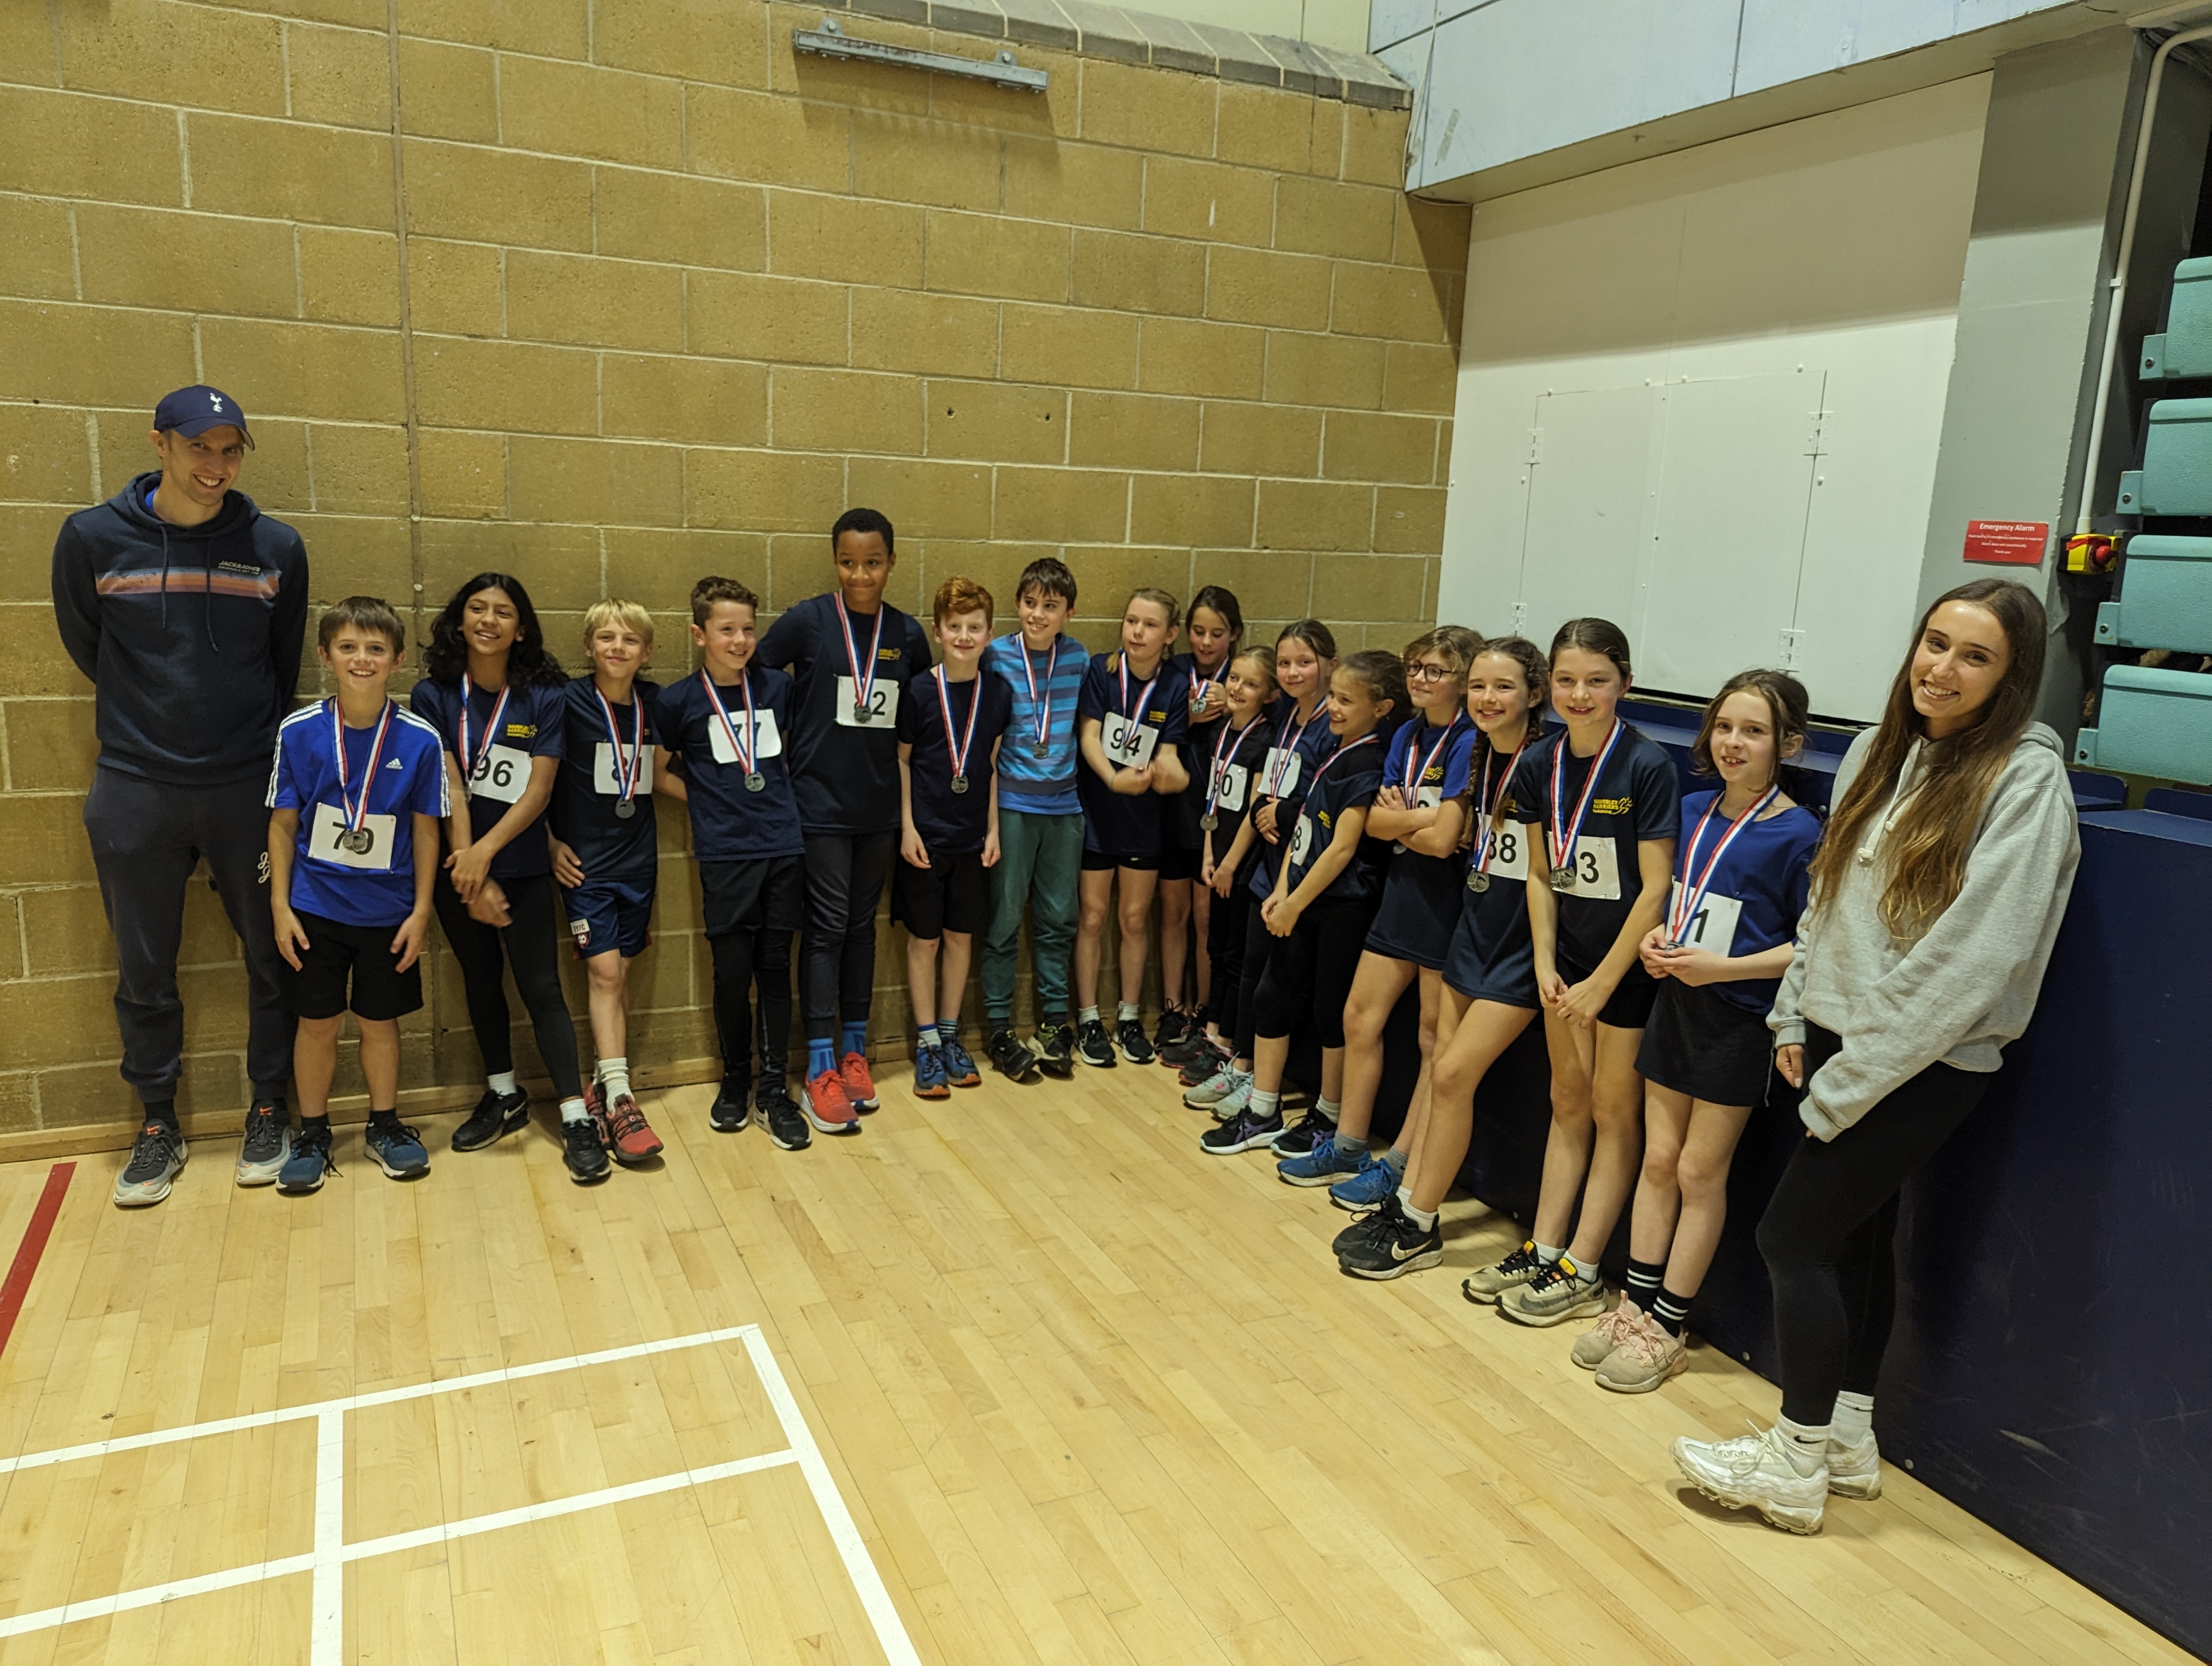 image from Waverley win silver at Surrey U11 Sportshall Champs